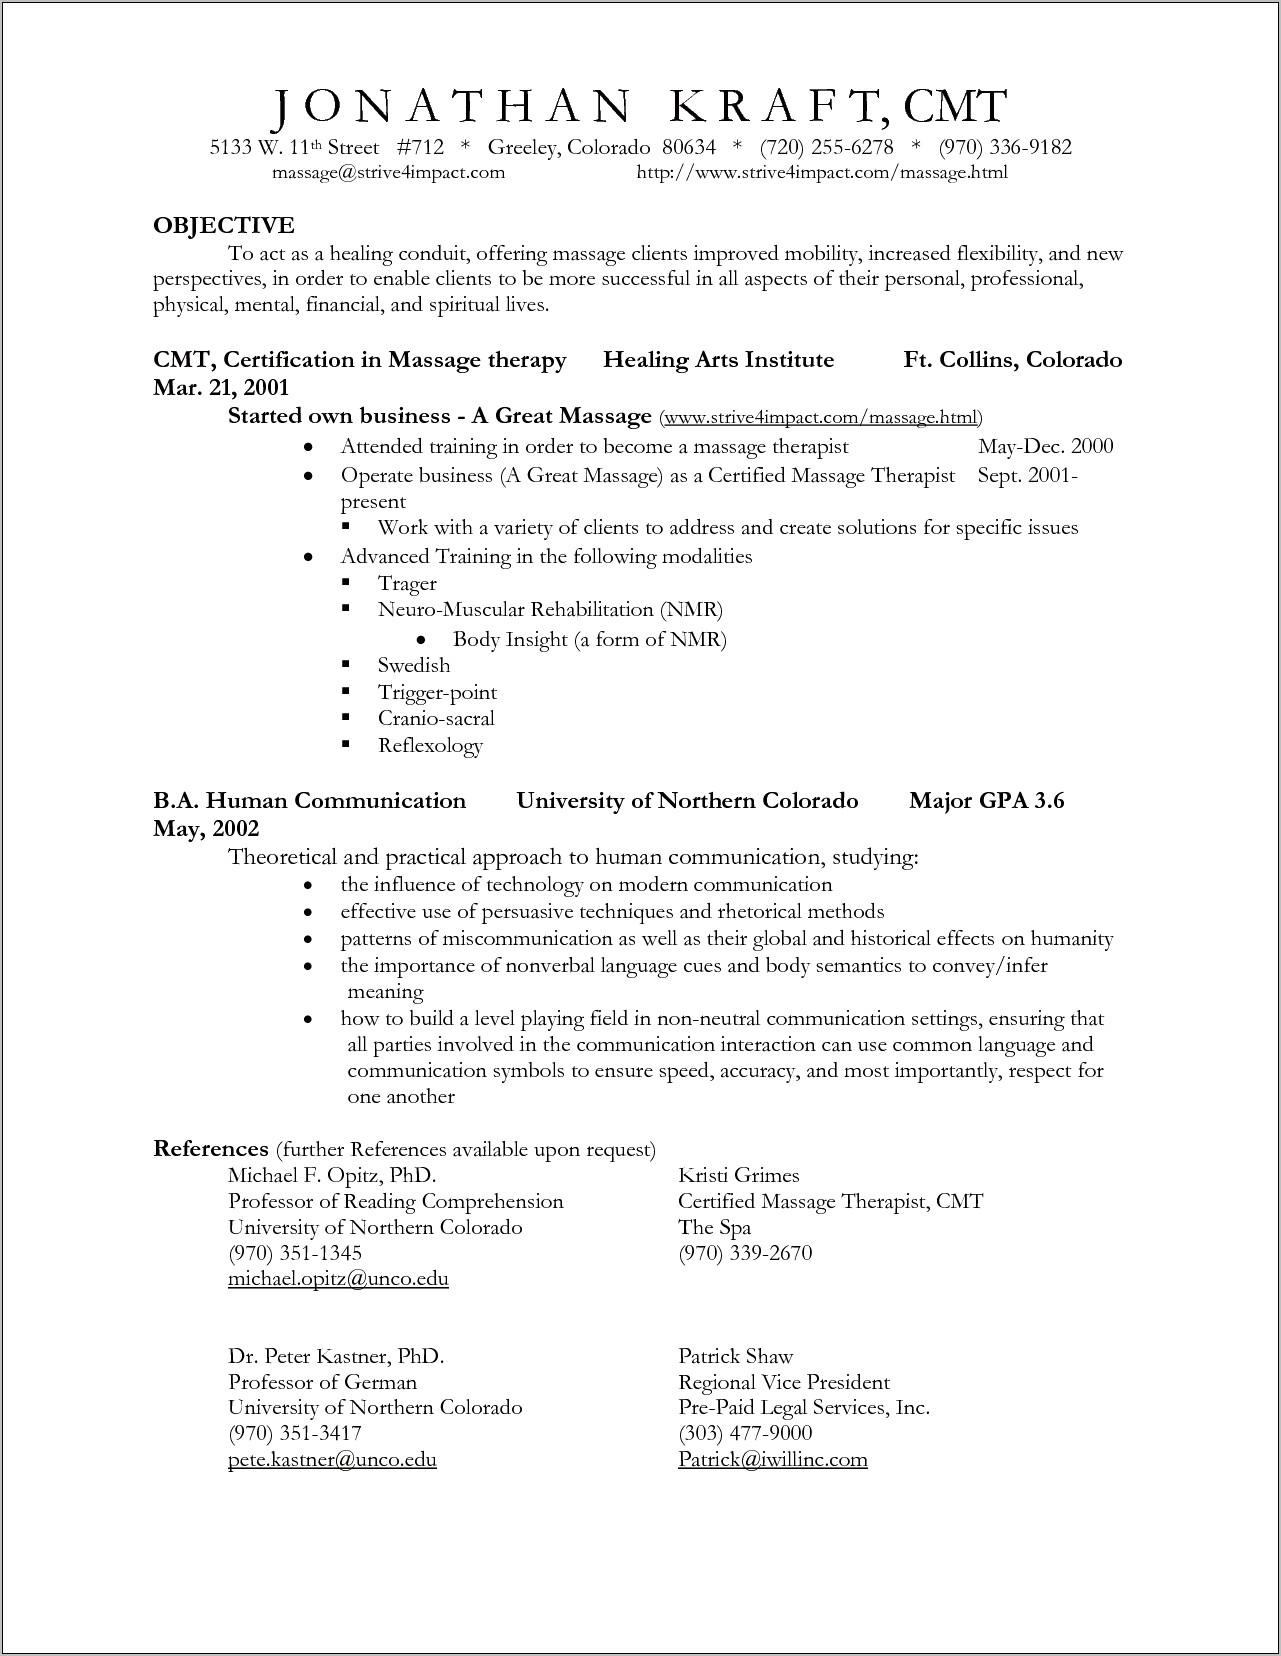 Good Sample Of Resume With Objectives